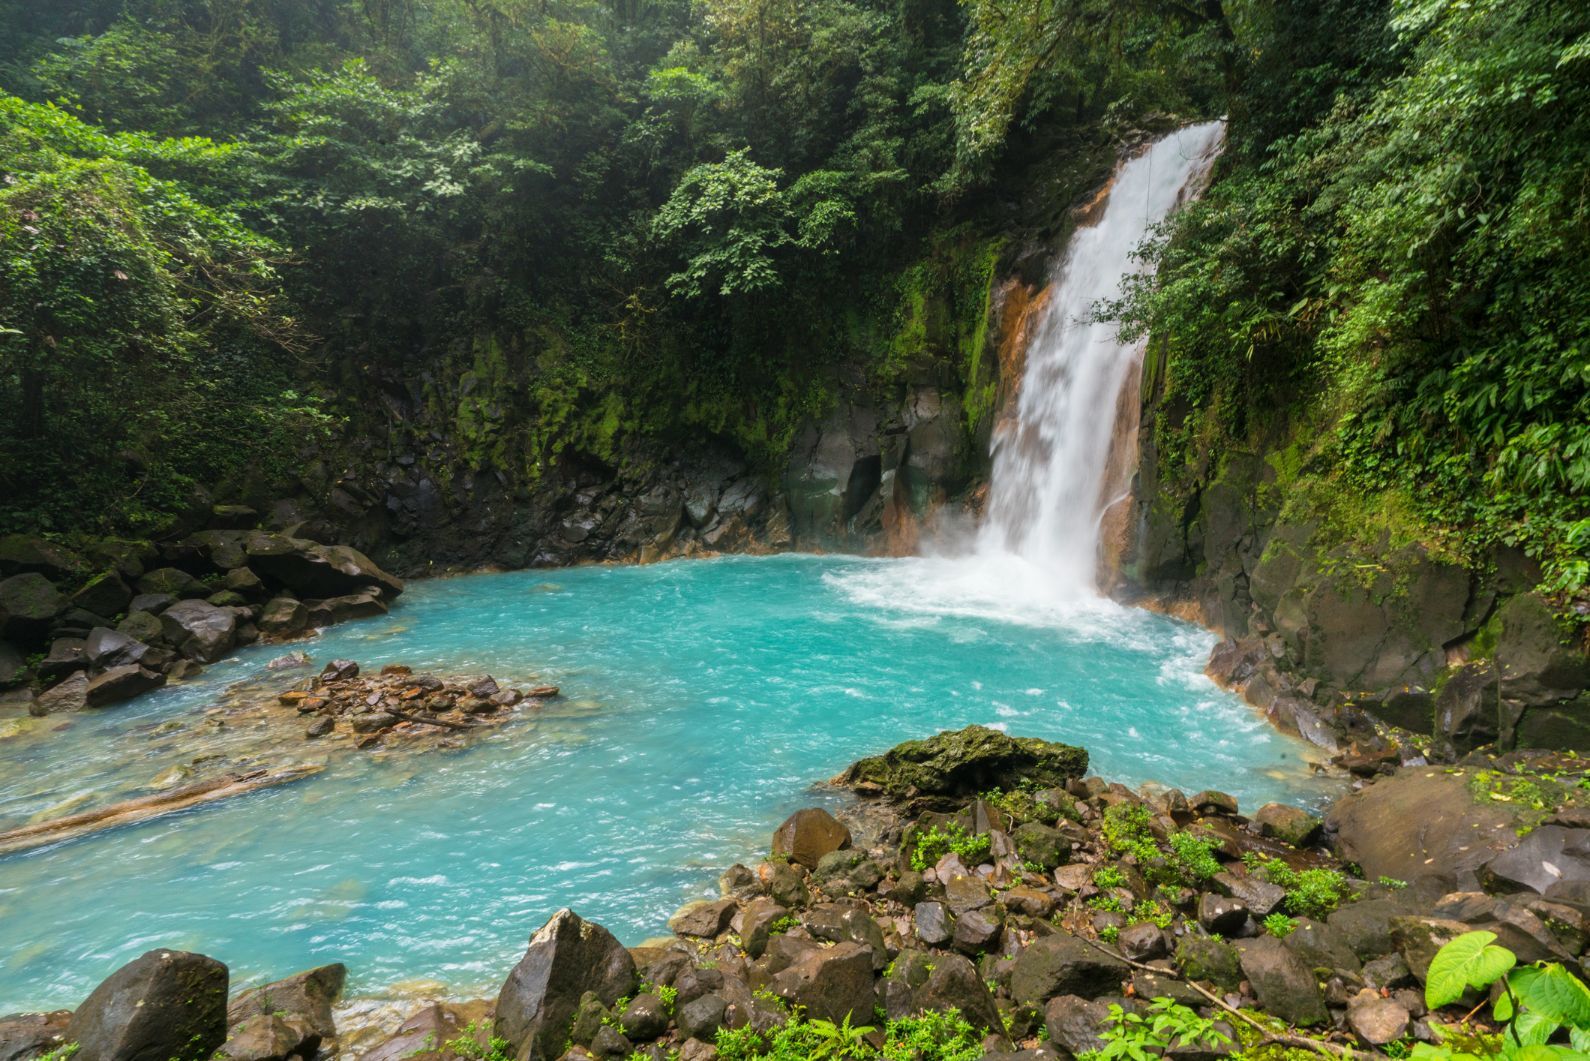 The beautiful blues of the waters in Tenorio make this one of the best hikes in Costa Rica. Photo: Getty